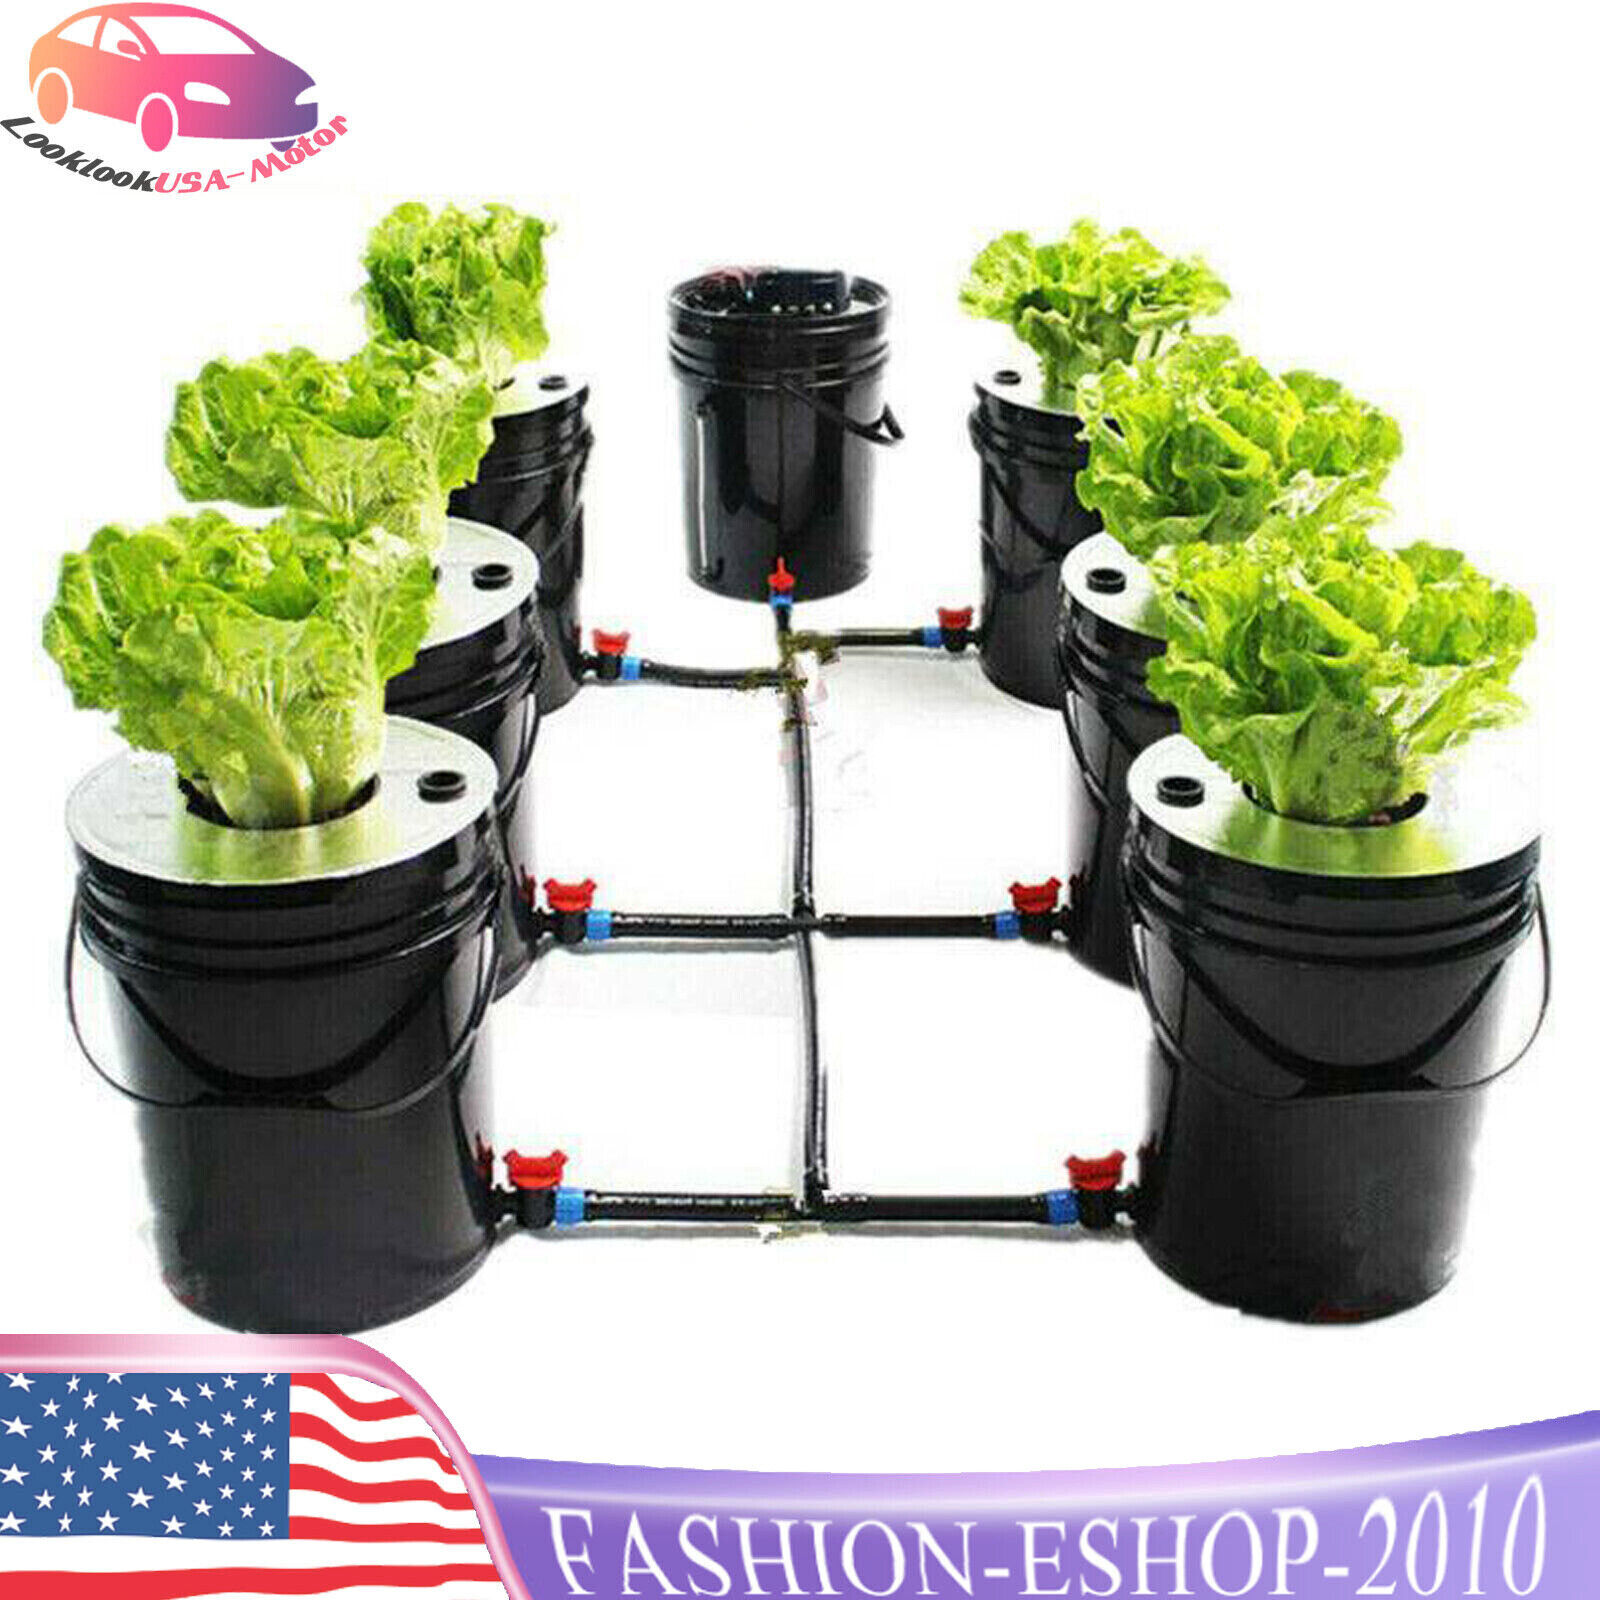 20L Indoor Deep Water Culture DWC Hydroponic System 6 Growing Sites W/ Pump US